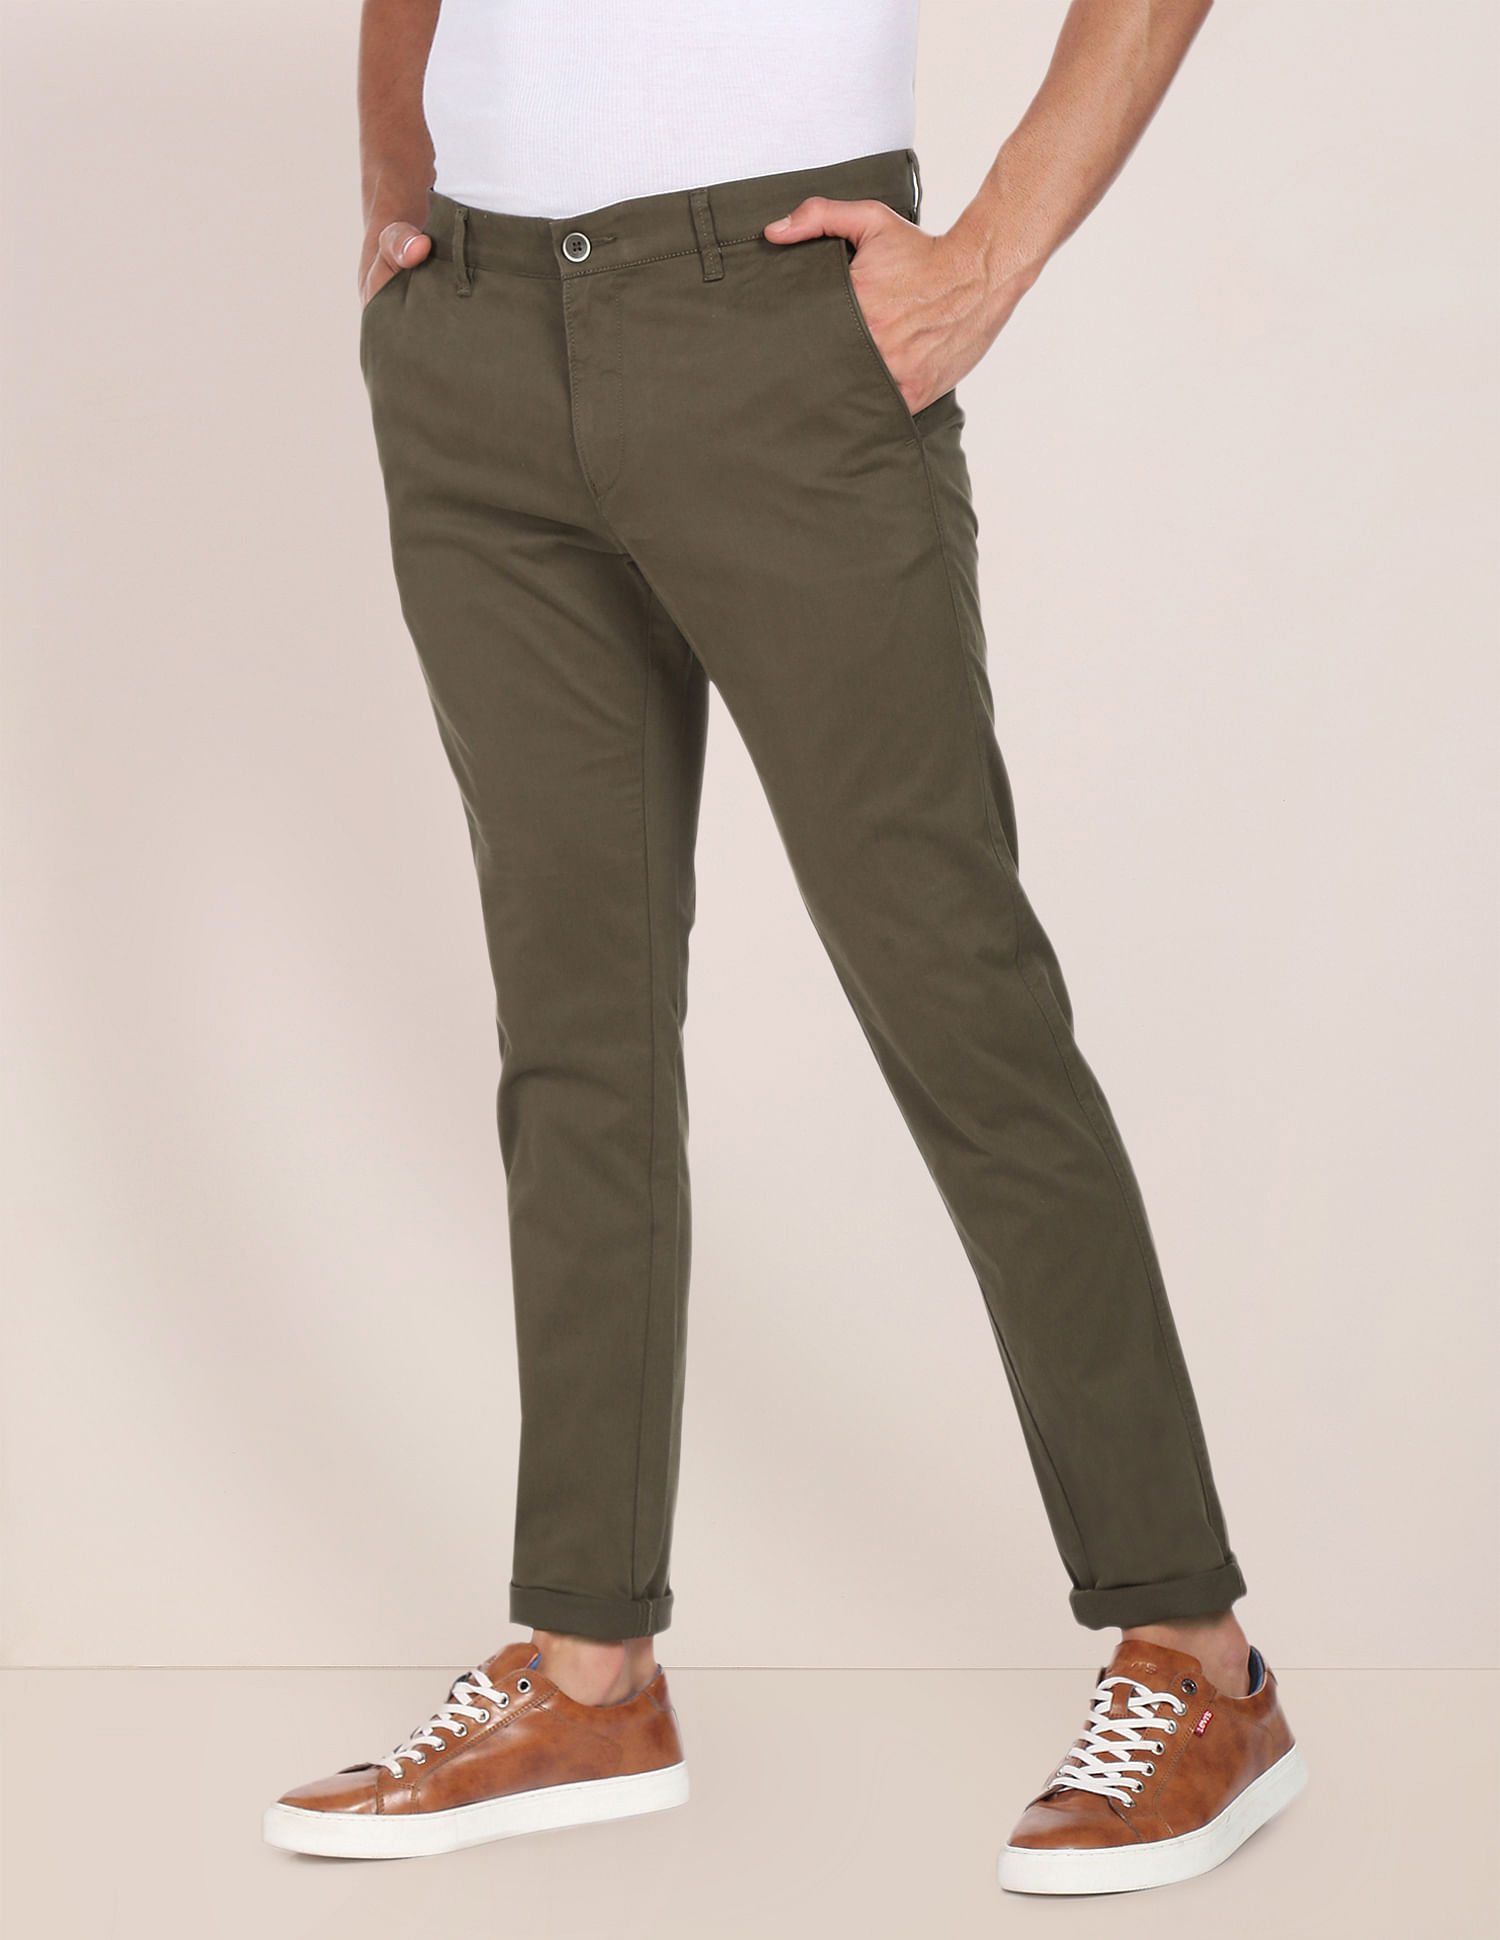 21 Olive green pants ideas  mens outfits men casual mens fashion casual